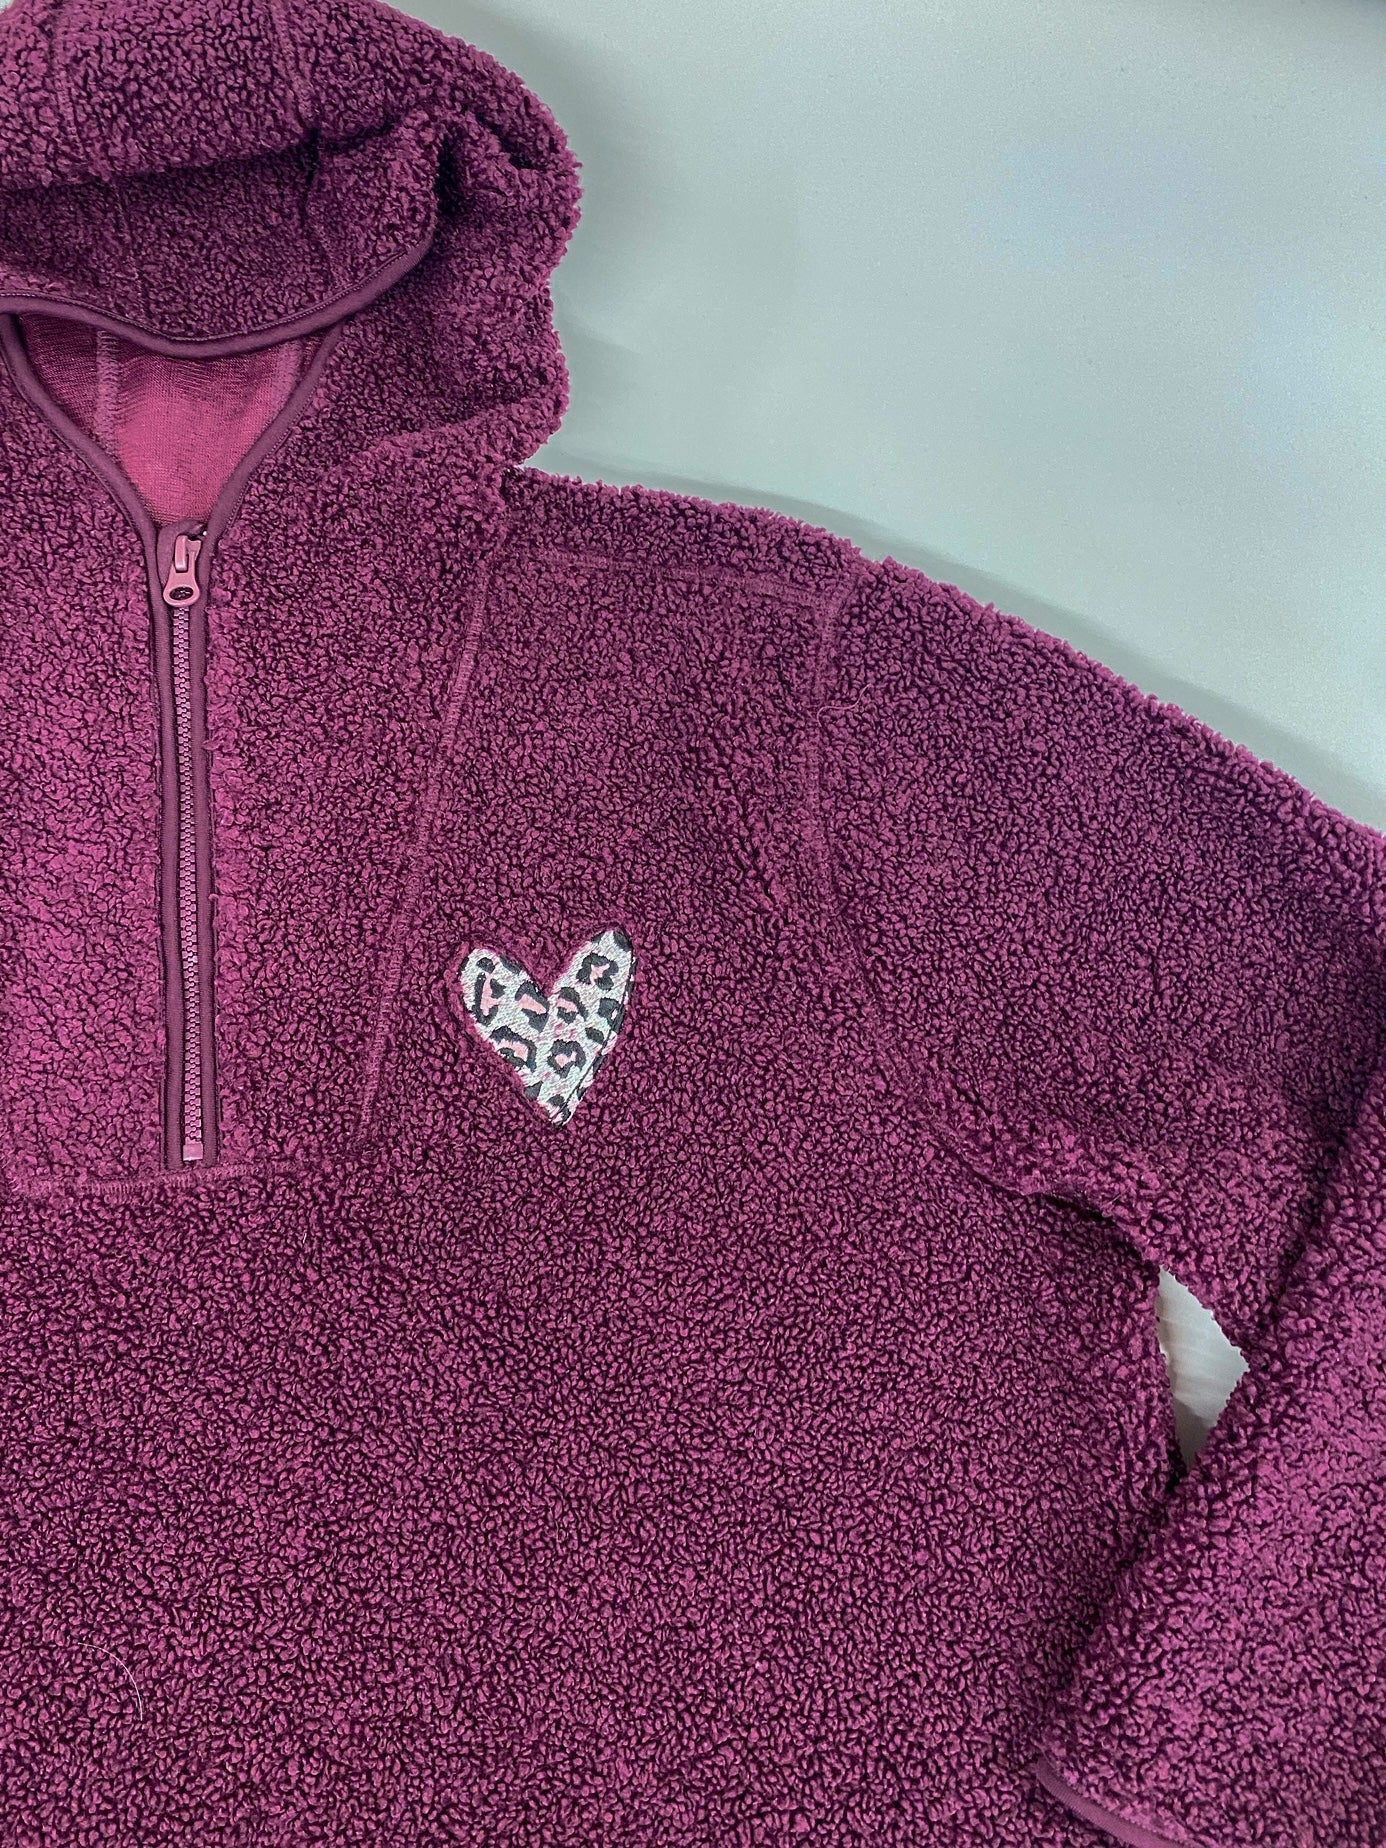 SAMPLE SALE Sherpa 1/4 Zip Fleece with Hood and Leopard Print Heart 3 colours Sizes 2XS, L-XL